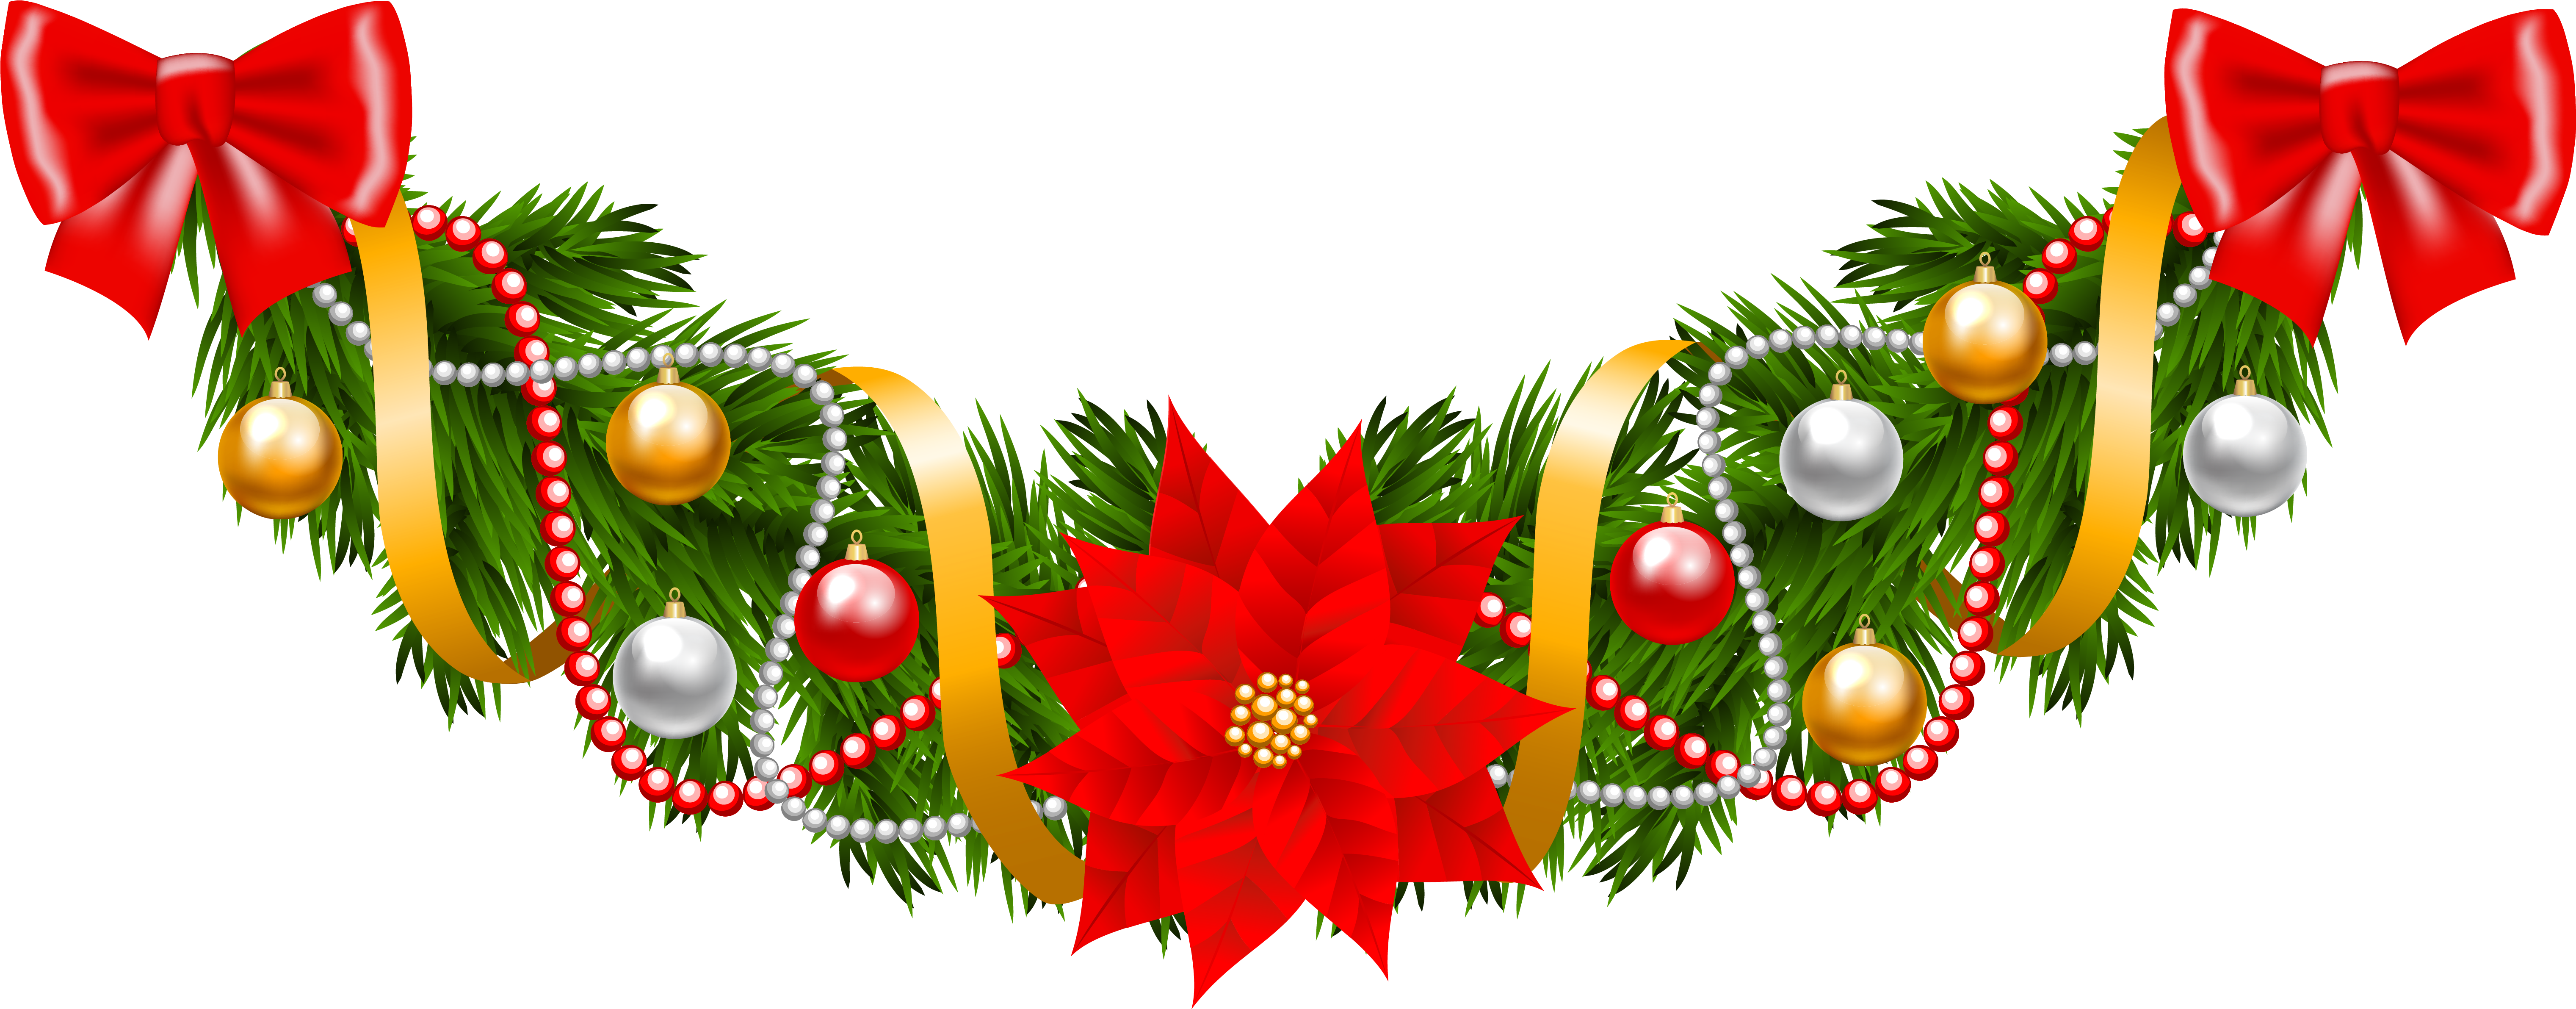 Garland Clipart Of Christmas Wreaths Image Clip Art - Christmas Garland Clipart (6281x2603), Png Download